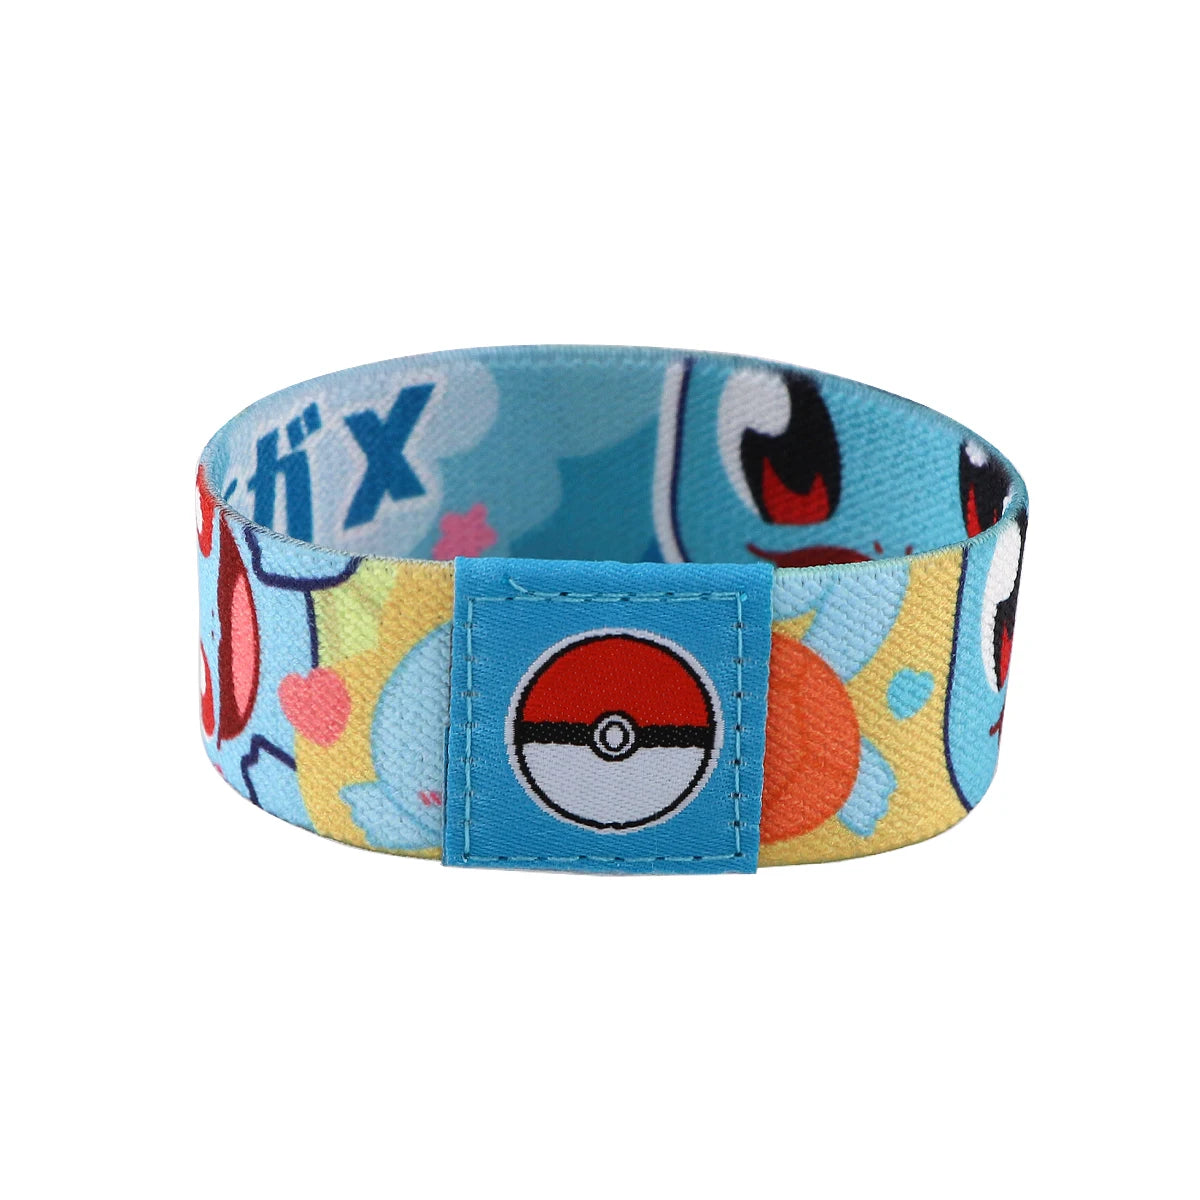 These charm bracelets are a playful addition to any anime enthusiast's collection. If you are looking for more Pokemon Merch, We have it all! | Check out all our Anime Merch now!